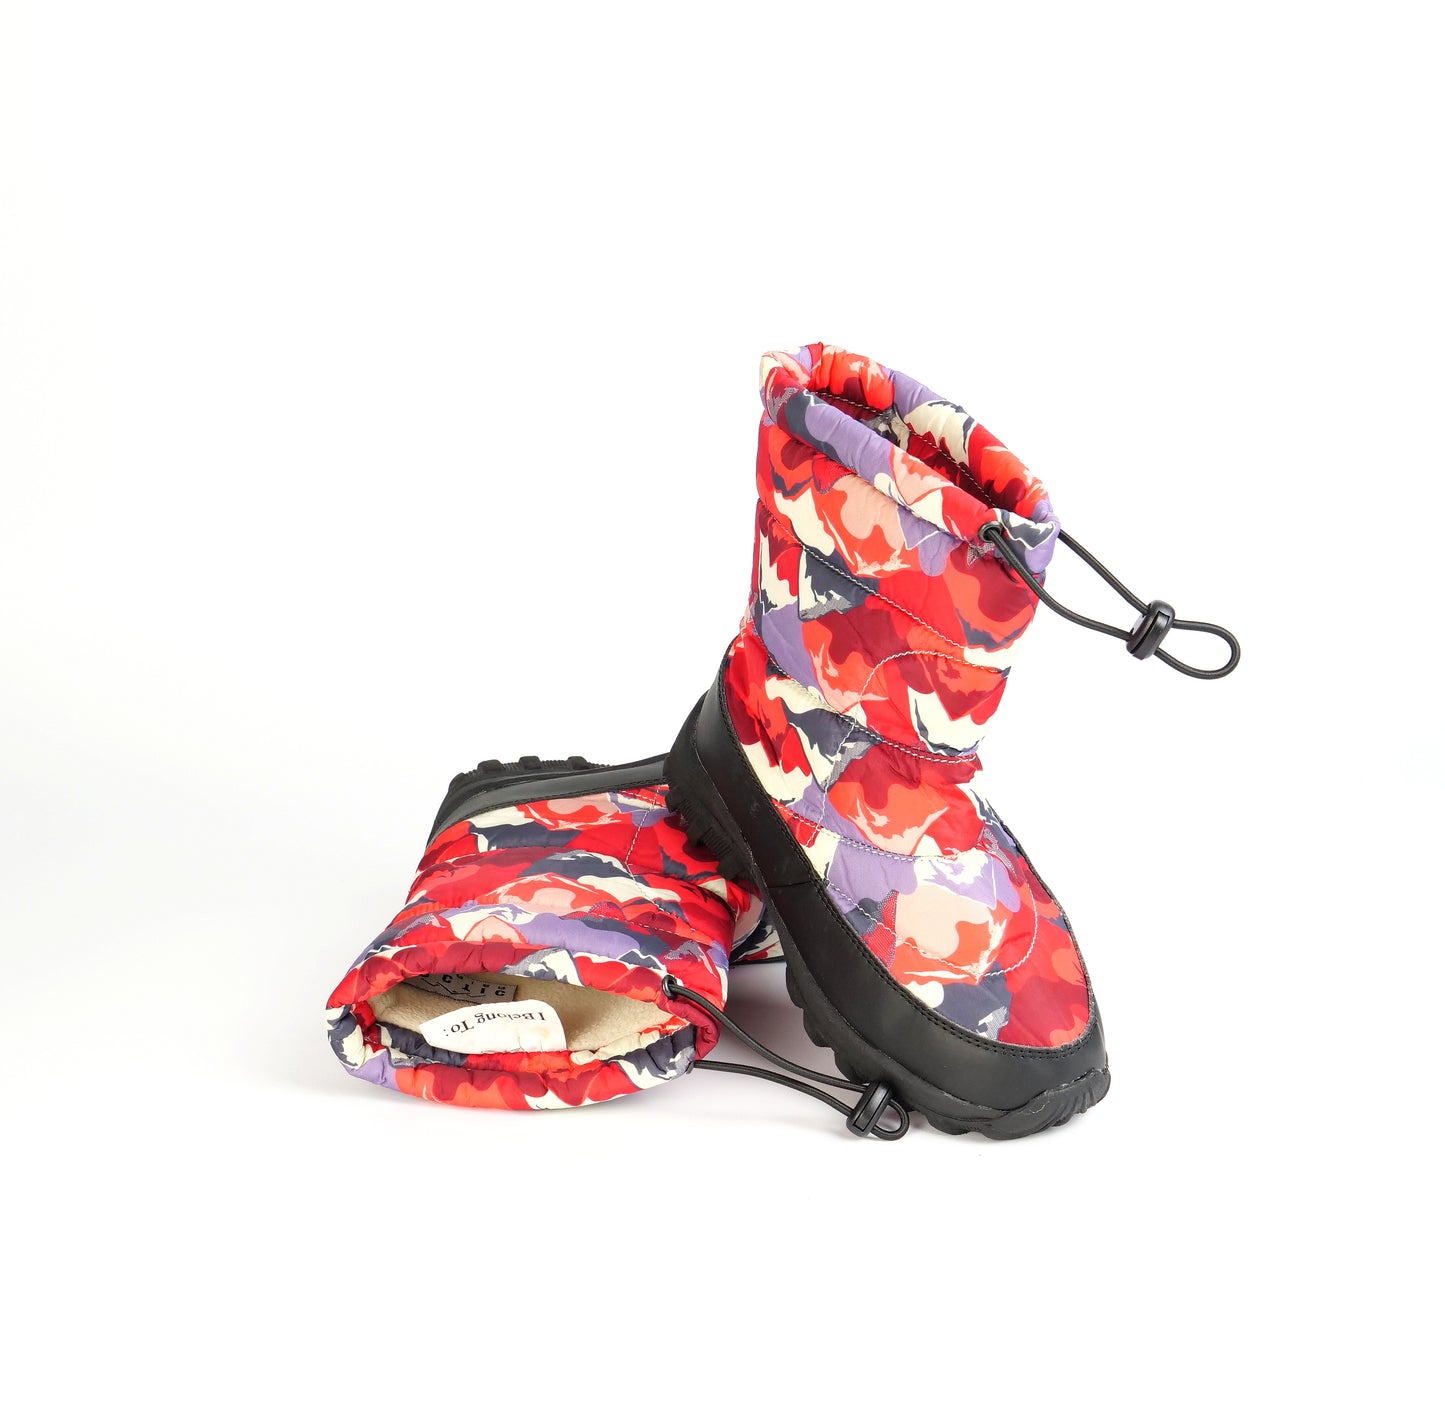 Fun Pack WINTER BOOTS AST for Girls